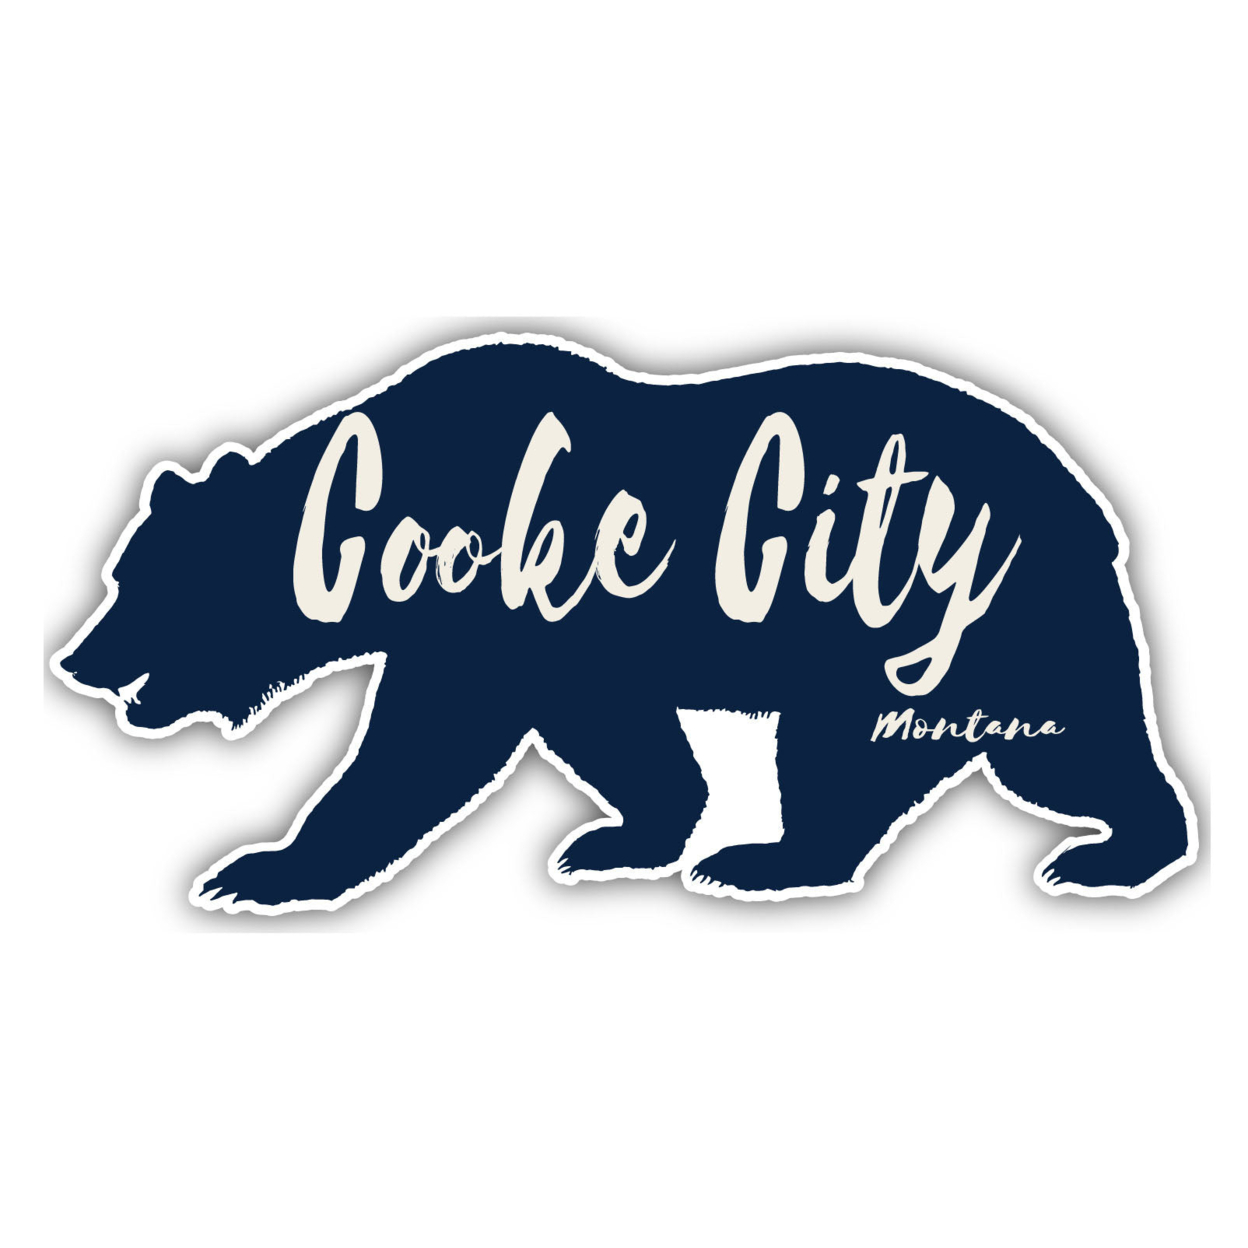 Cooke City Montana Souvenir Decorative Stickers (Choose Theme And Size) - 4-Pack, 6-Inch, Great Outdoors